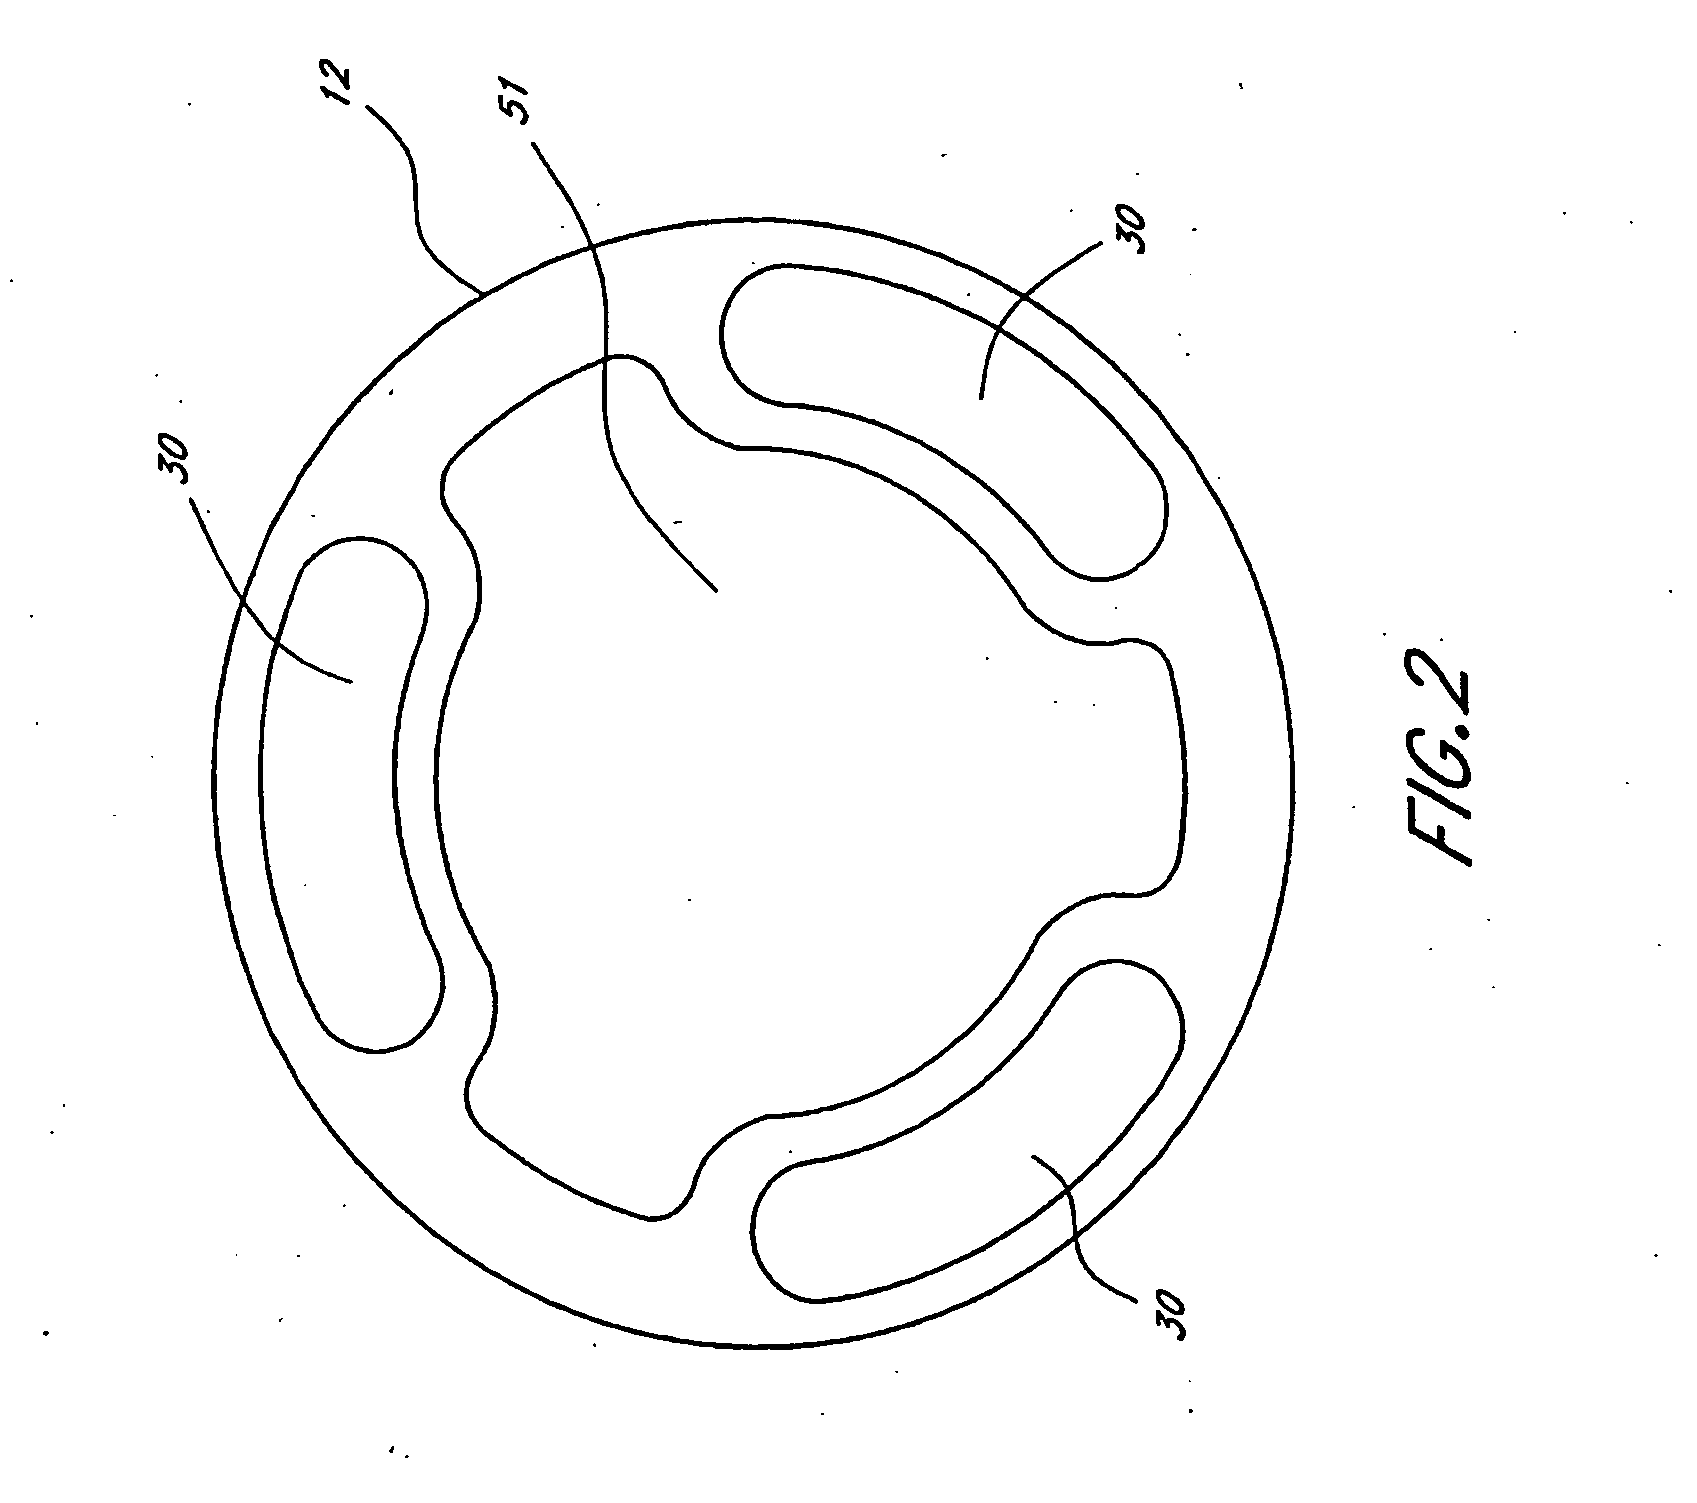 Catheter with ultrasound-controllable porous membrane